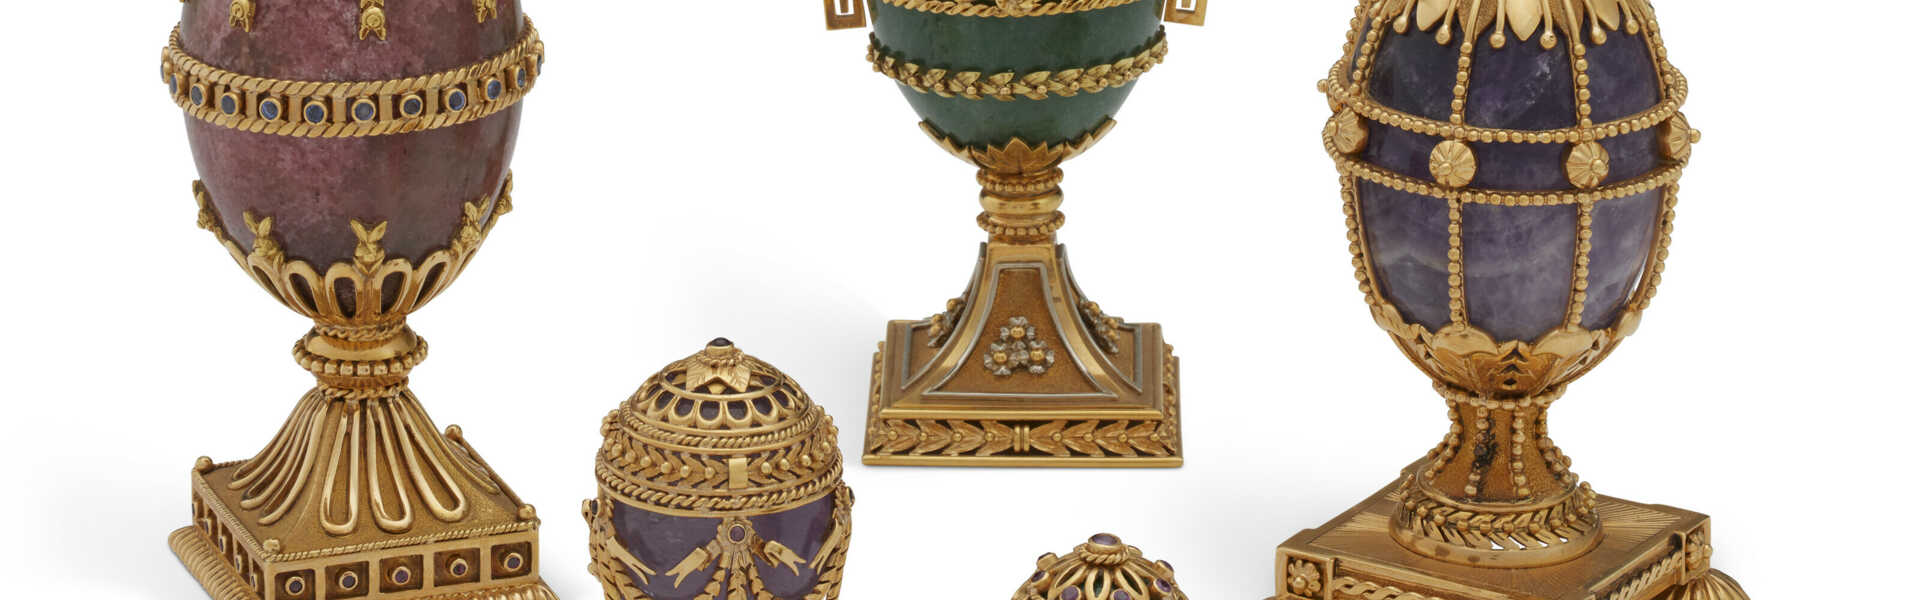 A GROUP OF FIVE GREEK GOLD AND GEM-MOUNTED HARDSTONE EGGS